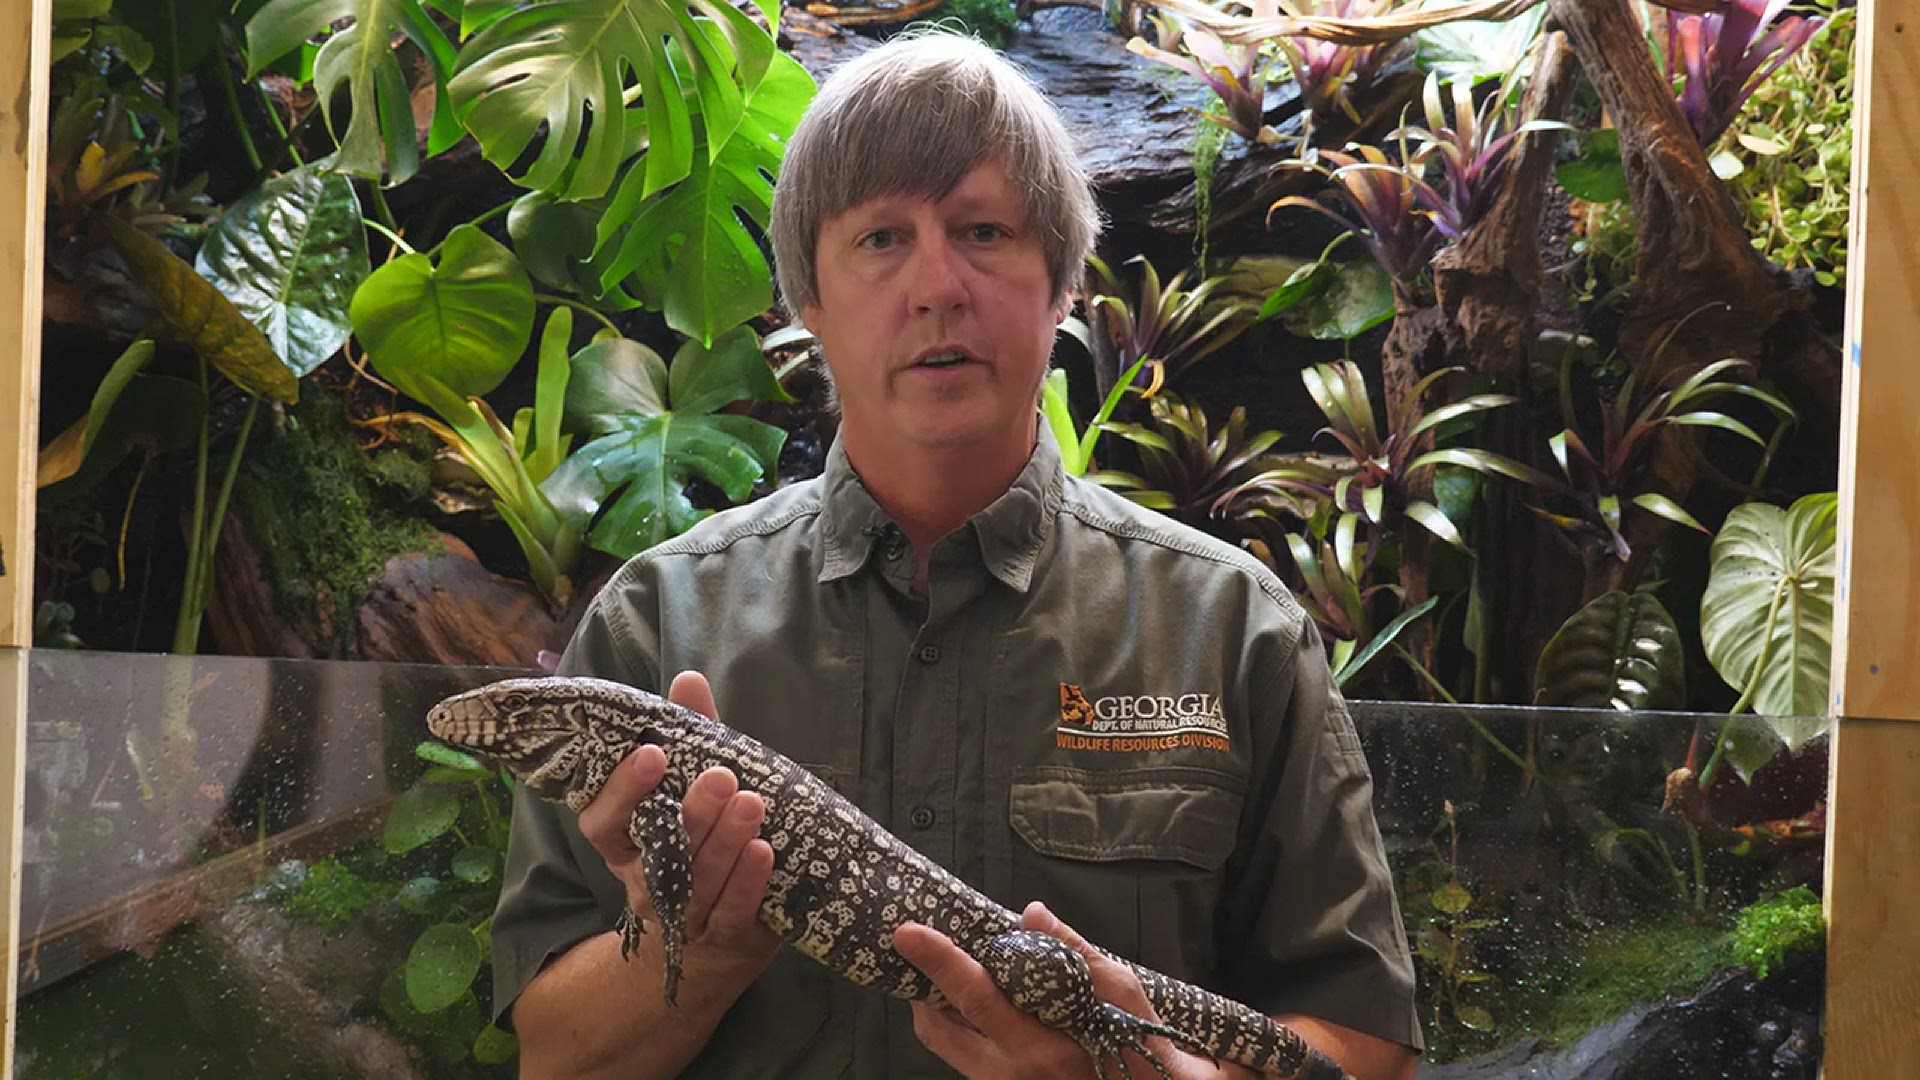 The Argentine Black and White Tegu lizard is described by the reptile conservation group the Orianne Society as a 'voracious predator.' (Video: Georgia DNR)